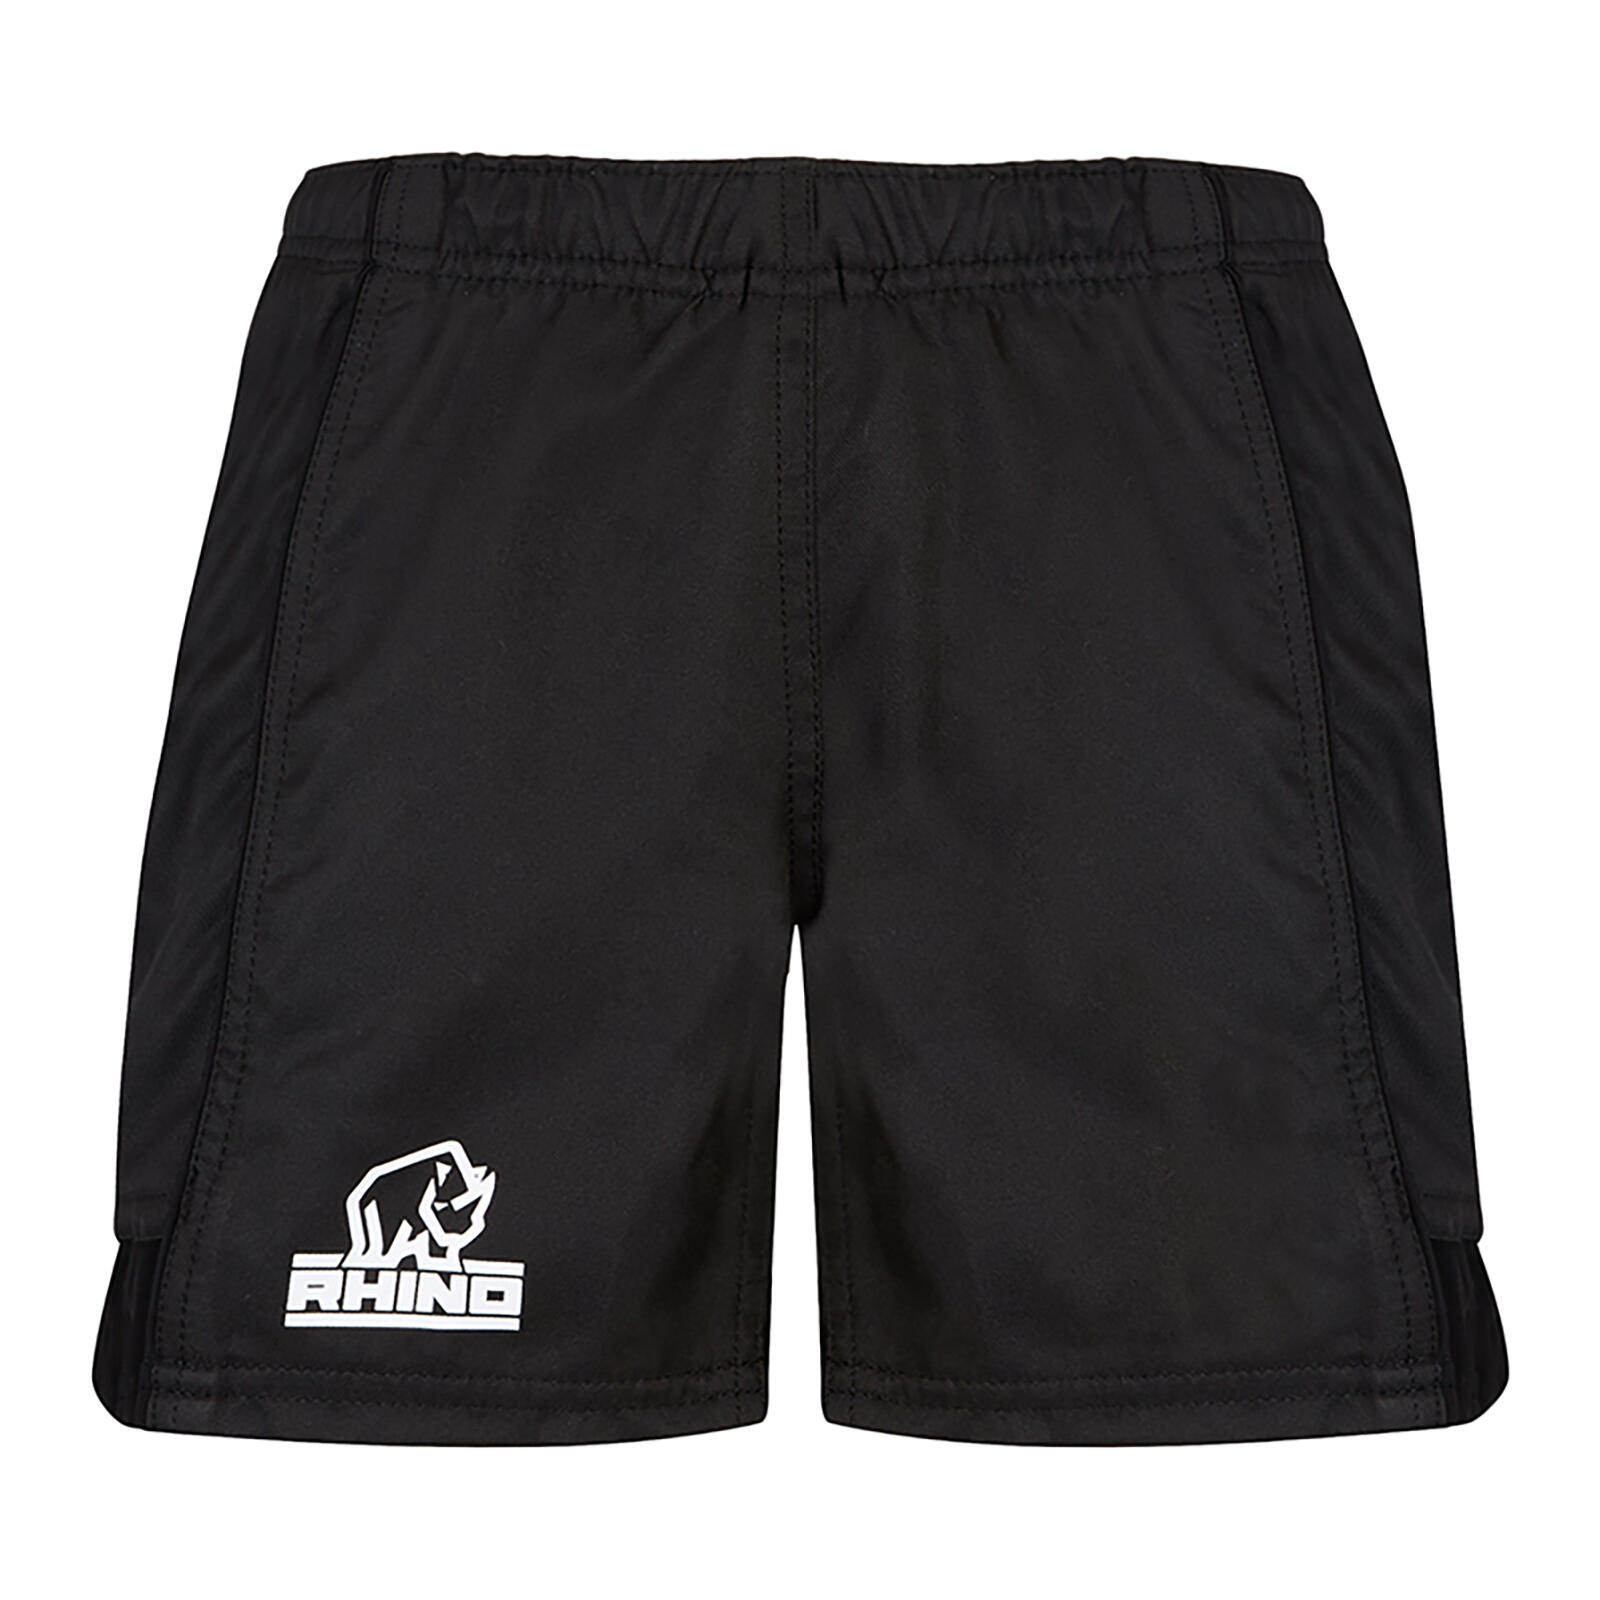 Mens Auckland Rugby Shorts (Black) 1/4